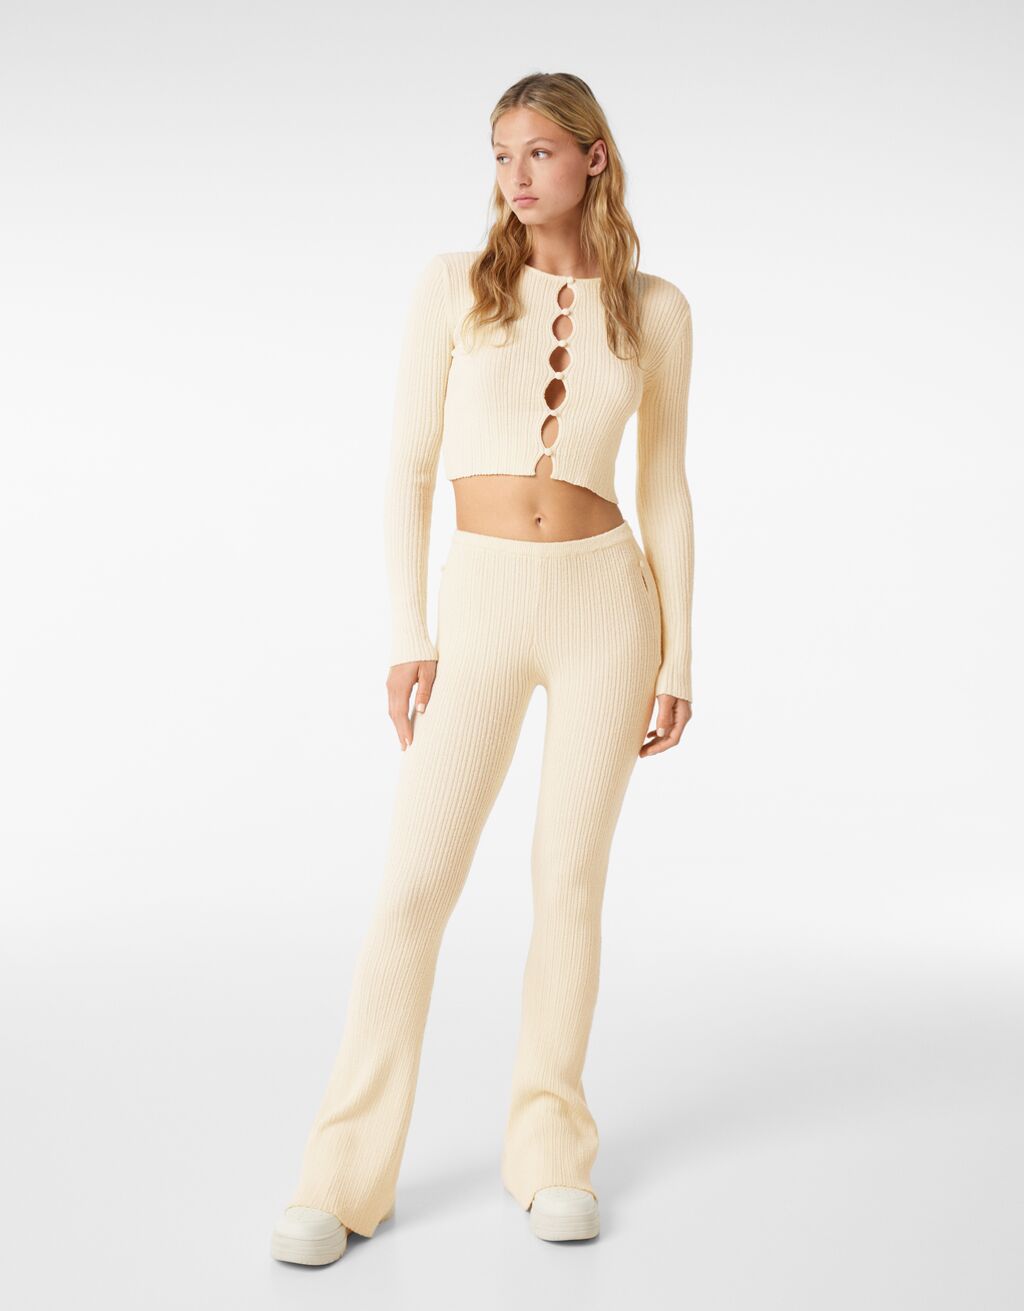 Rustic knit bell bottoms